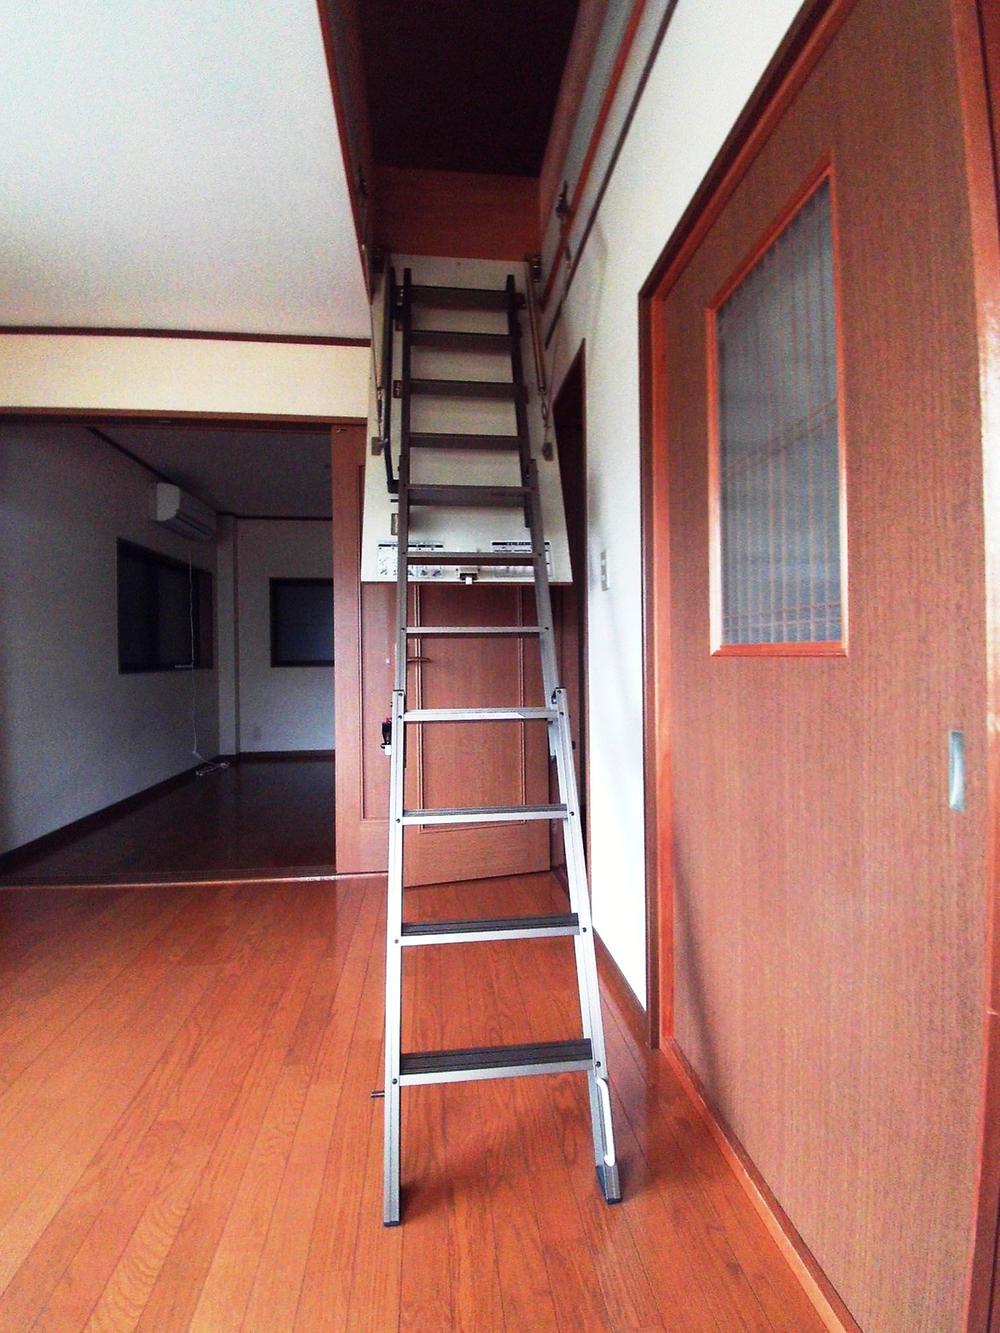 Other introspection. On the third floor Western-style room is, Stairs to the attic storage